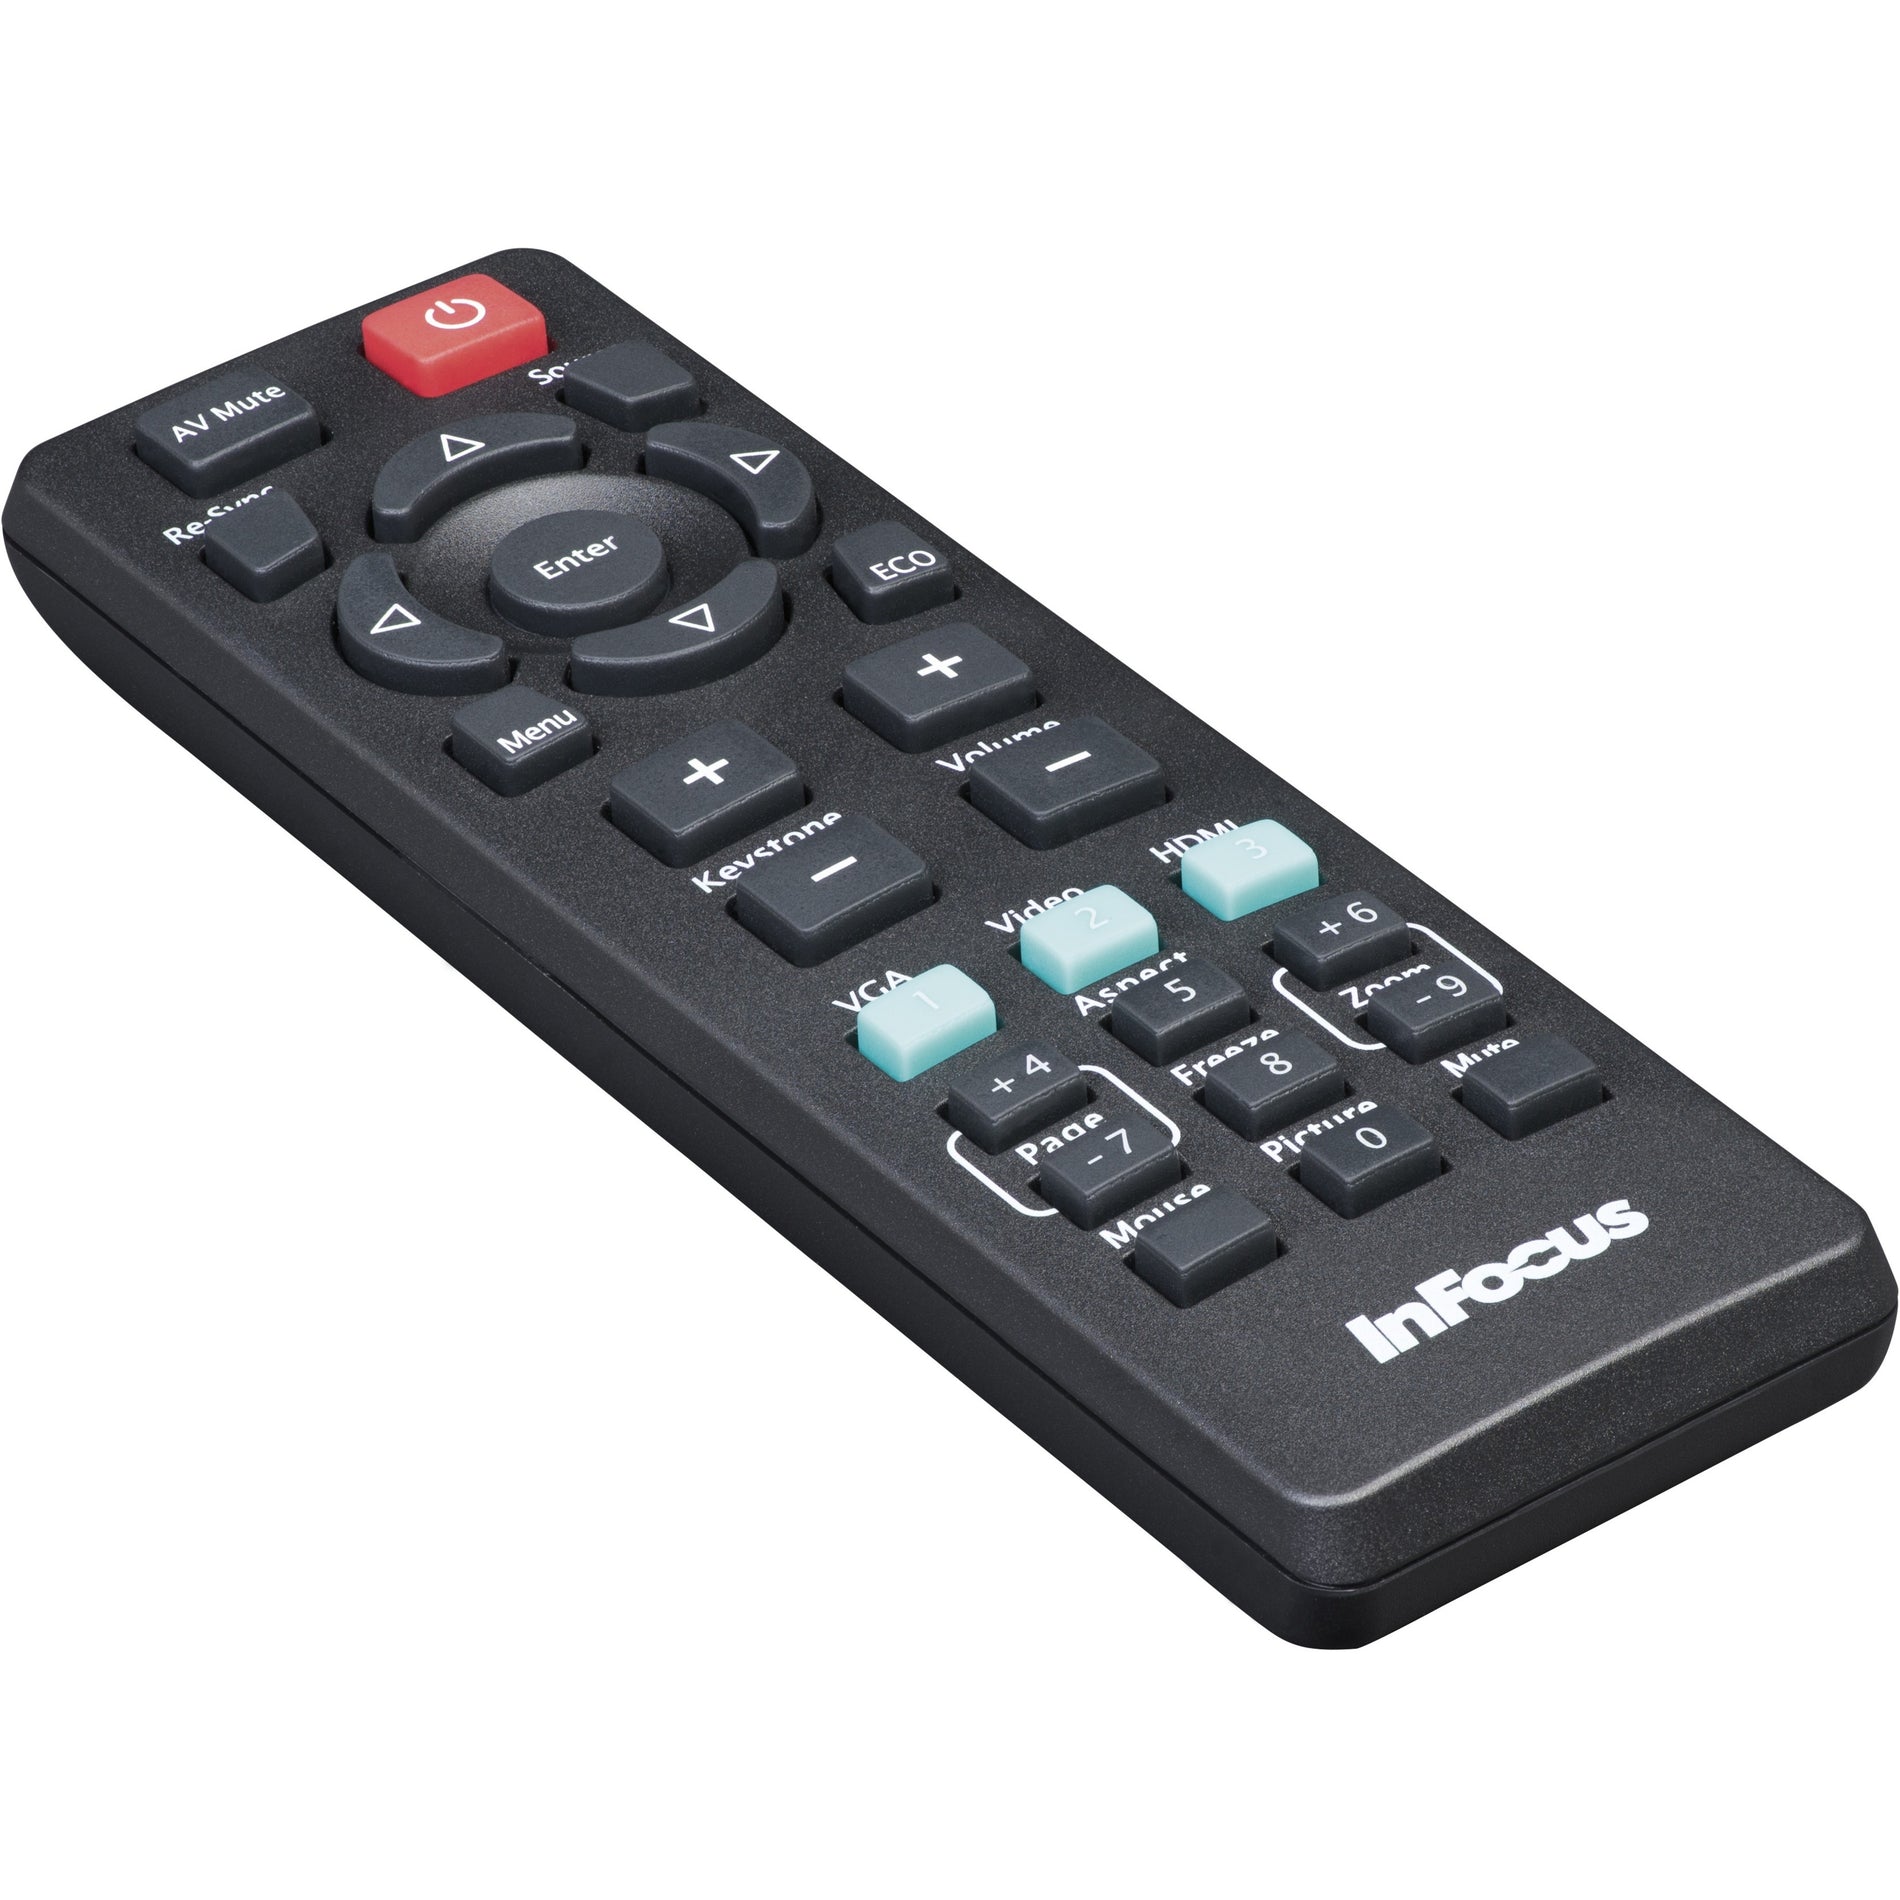 InFocus HW-NAVIGATOR-5 Standard Replacement Remote, Compatible with IN110x, IN120x, IN120STx, IN130, IN130ST, IN2120x, IN2130, IN3130a, IN3140, IN5140, IN5310a, IN1110, IN8606HD, SP1080 Projectors